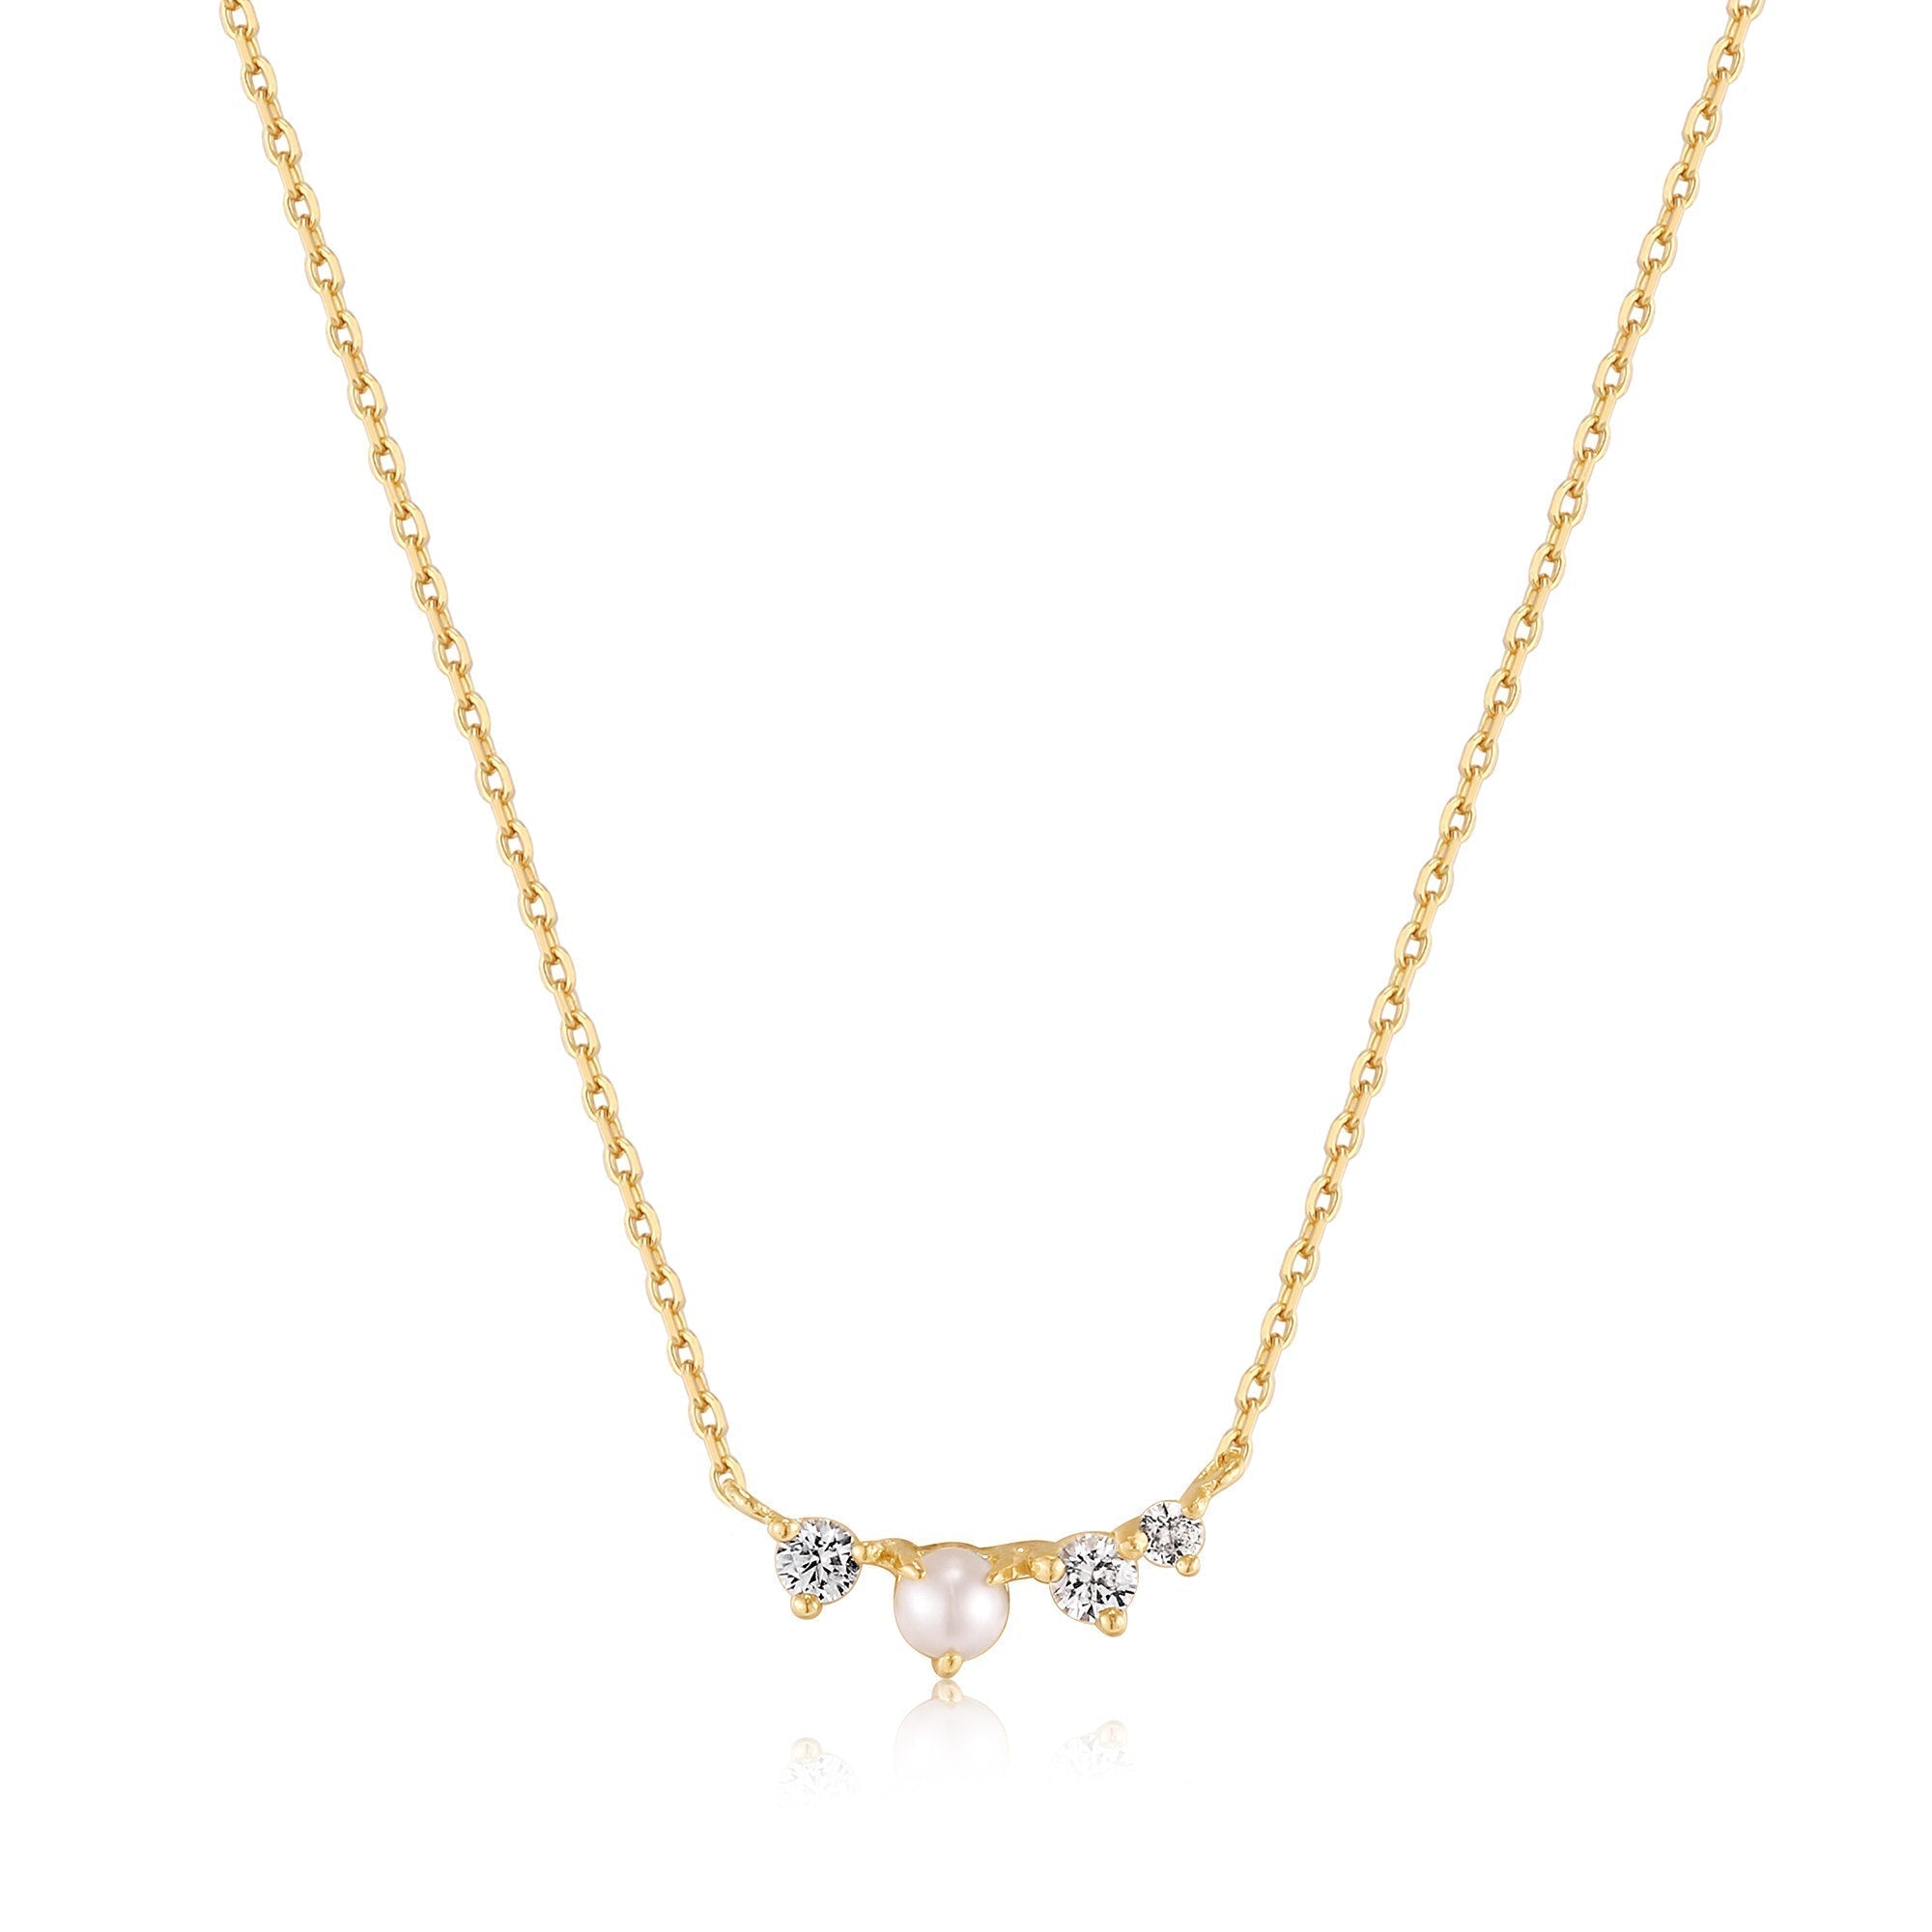 Ania Haie 14kt Gold Pearl and White Sapphire Radiance Necklace